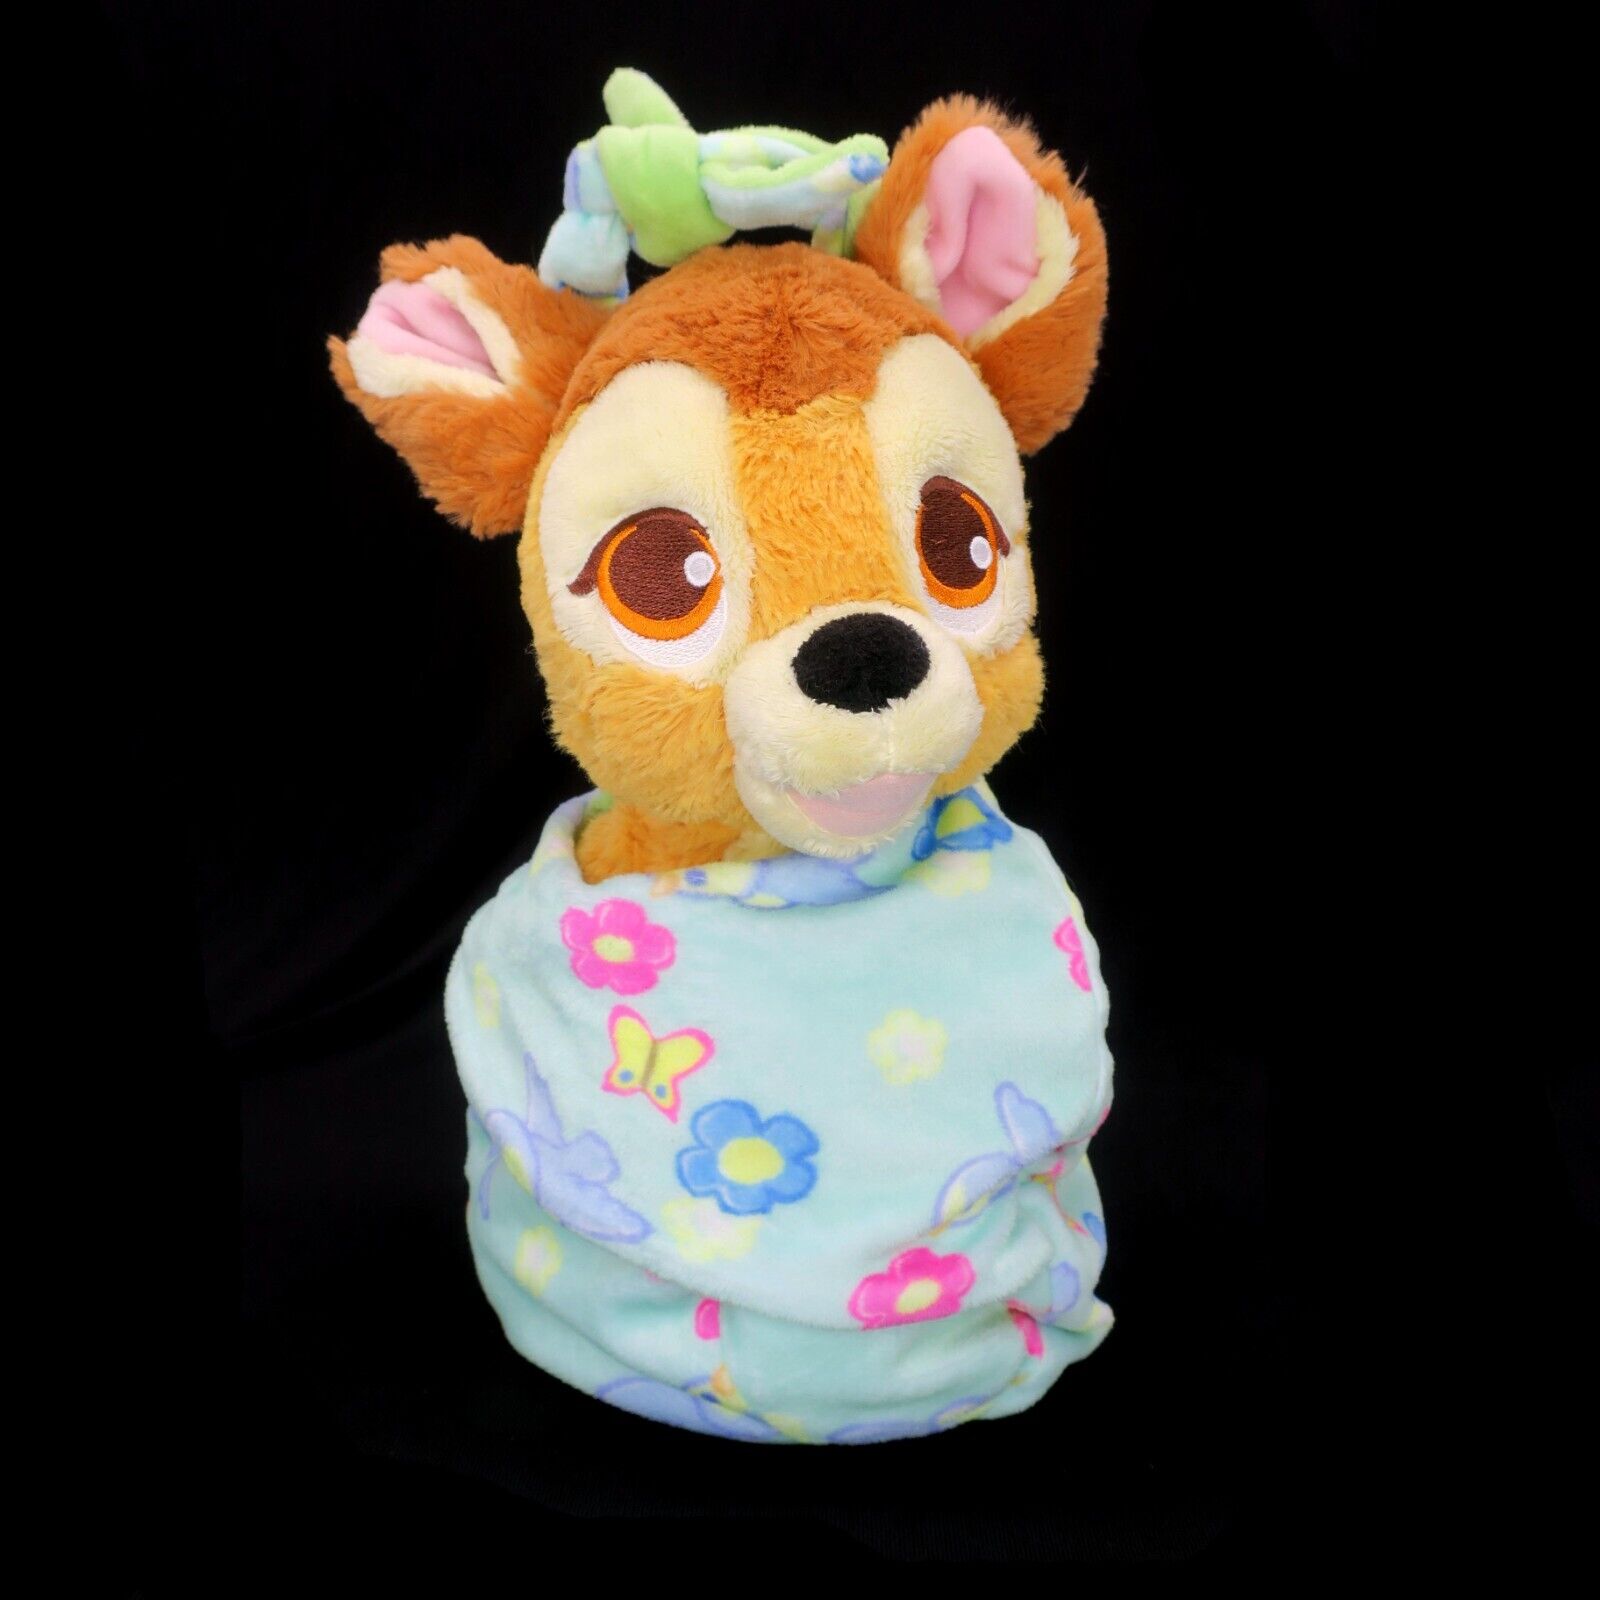 Disney Babies Swaddle Baby Bambi Plush Toy in Blanket Pouch Stuffed Animal Lovey